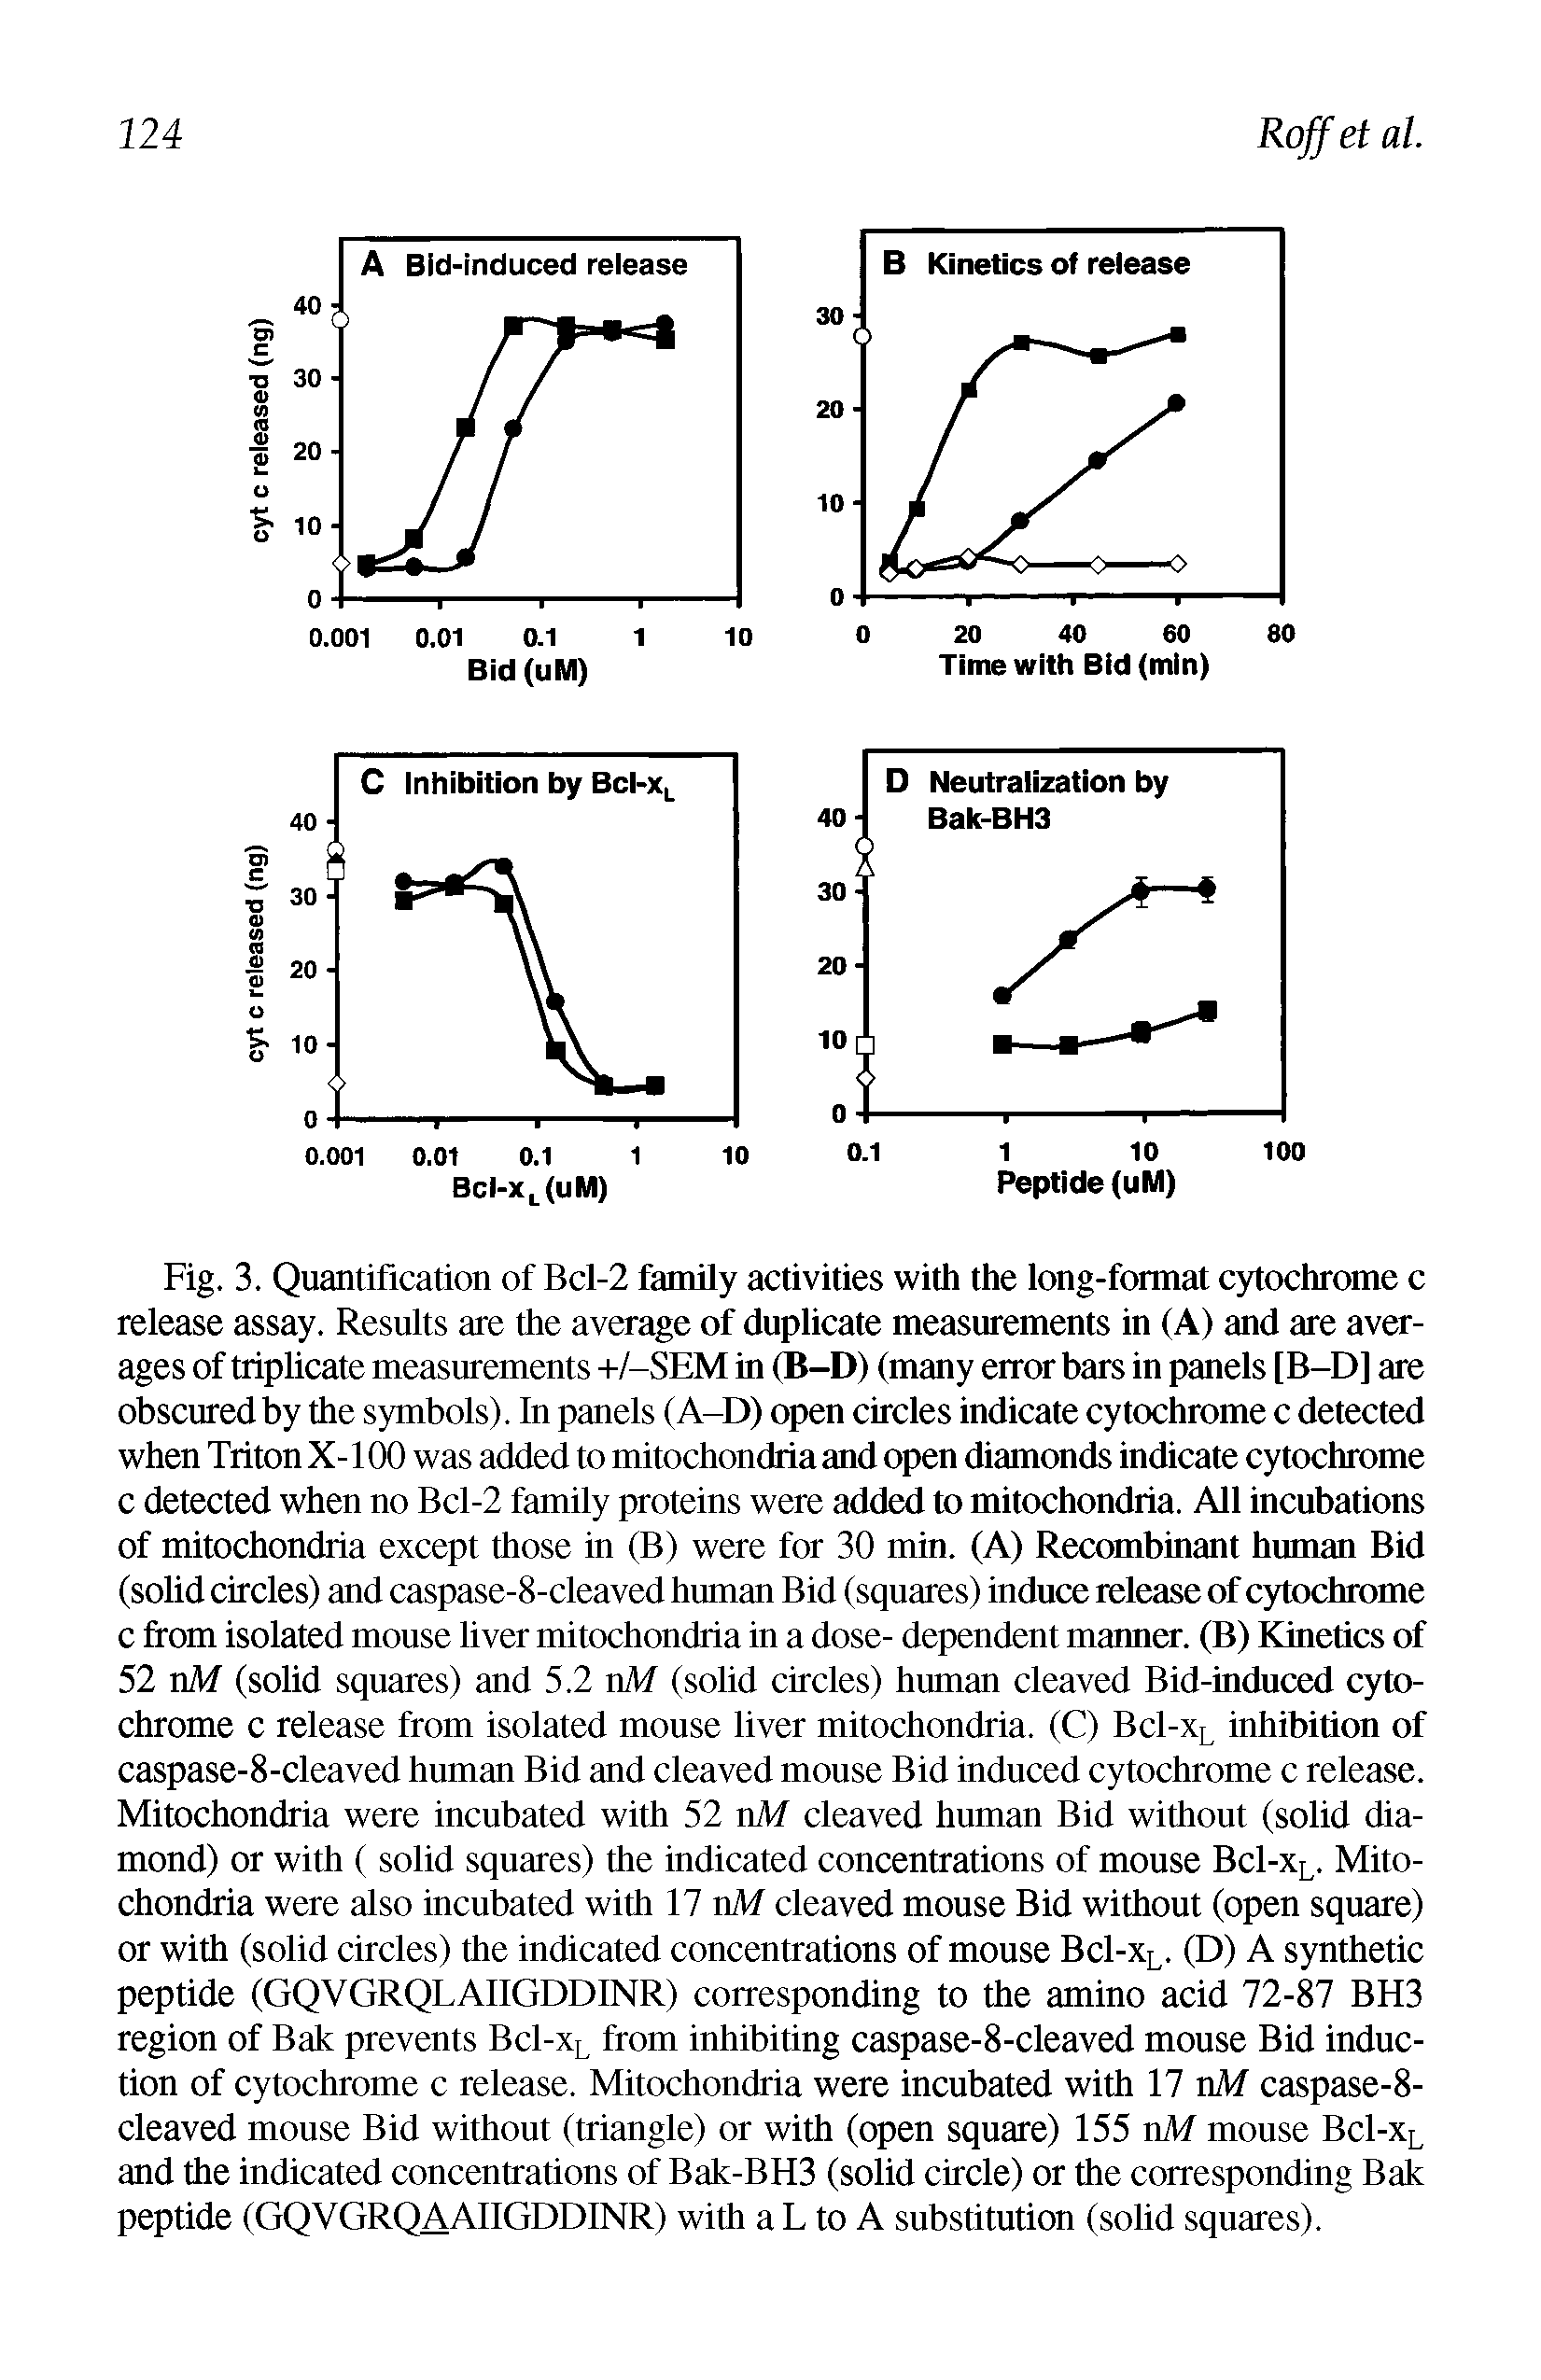 Fig. 3. Quantification of Bcl-2 family activities with the long-format cytochrome c release assay. Results are the average of duplicate measurements in (A) and are averages of triplicate measurements +/-SEM in (B-D) (many error bars in panels [B-D] are obscured by the symbols). In panels (A-D) open circles indicate cytochrome c detected when Triton X-100 was added to mitochondria and open diamonds indicate cytochrome c detected when no Bcl-2 family proteins were added to mitochondria. All incubations of mitochondria except those in (B) were for 30 min. (A) Recombinant human Bid (solid circles) and caspase-8-cleaved human Bid (squares) induce release of cytochrome c from isolated mouse liver mitochondria in a dose- dependent manner. (B) Kinetics of 52 nM (solid squares) and 5.2 nM (solid circles) human cleaved Bid-induced cytochrome c release from isolated mouse liver mitochondria. (C) Bcl-xL inhibition of caspase-8-cleaved human Bid and cleaved mouse Bid induced cytochrome c release. Mitochondria were incubated with 52 nM cleaved human Bid without (solid diamond) or with ( solid squares) the indicated concentrations of mouse Bcl-xL. Mitochondria were also incubated with 17 nM cleaved mouse Bid without (open square) or with (solid circles) the indicated concentrations of mouse Bcl-xL. (D) A synthetic peptide (GQVGRQLAIIGDDINR) corresponding to the amino acid 72-87 BH3 region of Bak prevents Bcl-xL from inhibiting caspase-8-cleaved mouse Bid induction of cytochrome c release. Mitochondria were incubated with 17 nM caspase-8-cleaved mouse Bid without (triangle) or with (open square) 155 nM mouse Bcl-xL and the indicated concentrations of Bak-BH3 (solid circle) or the corresponding Bak peptide (GQVGRQAAIIGDDINR) with a L to A substitution (solid squares).